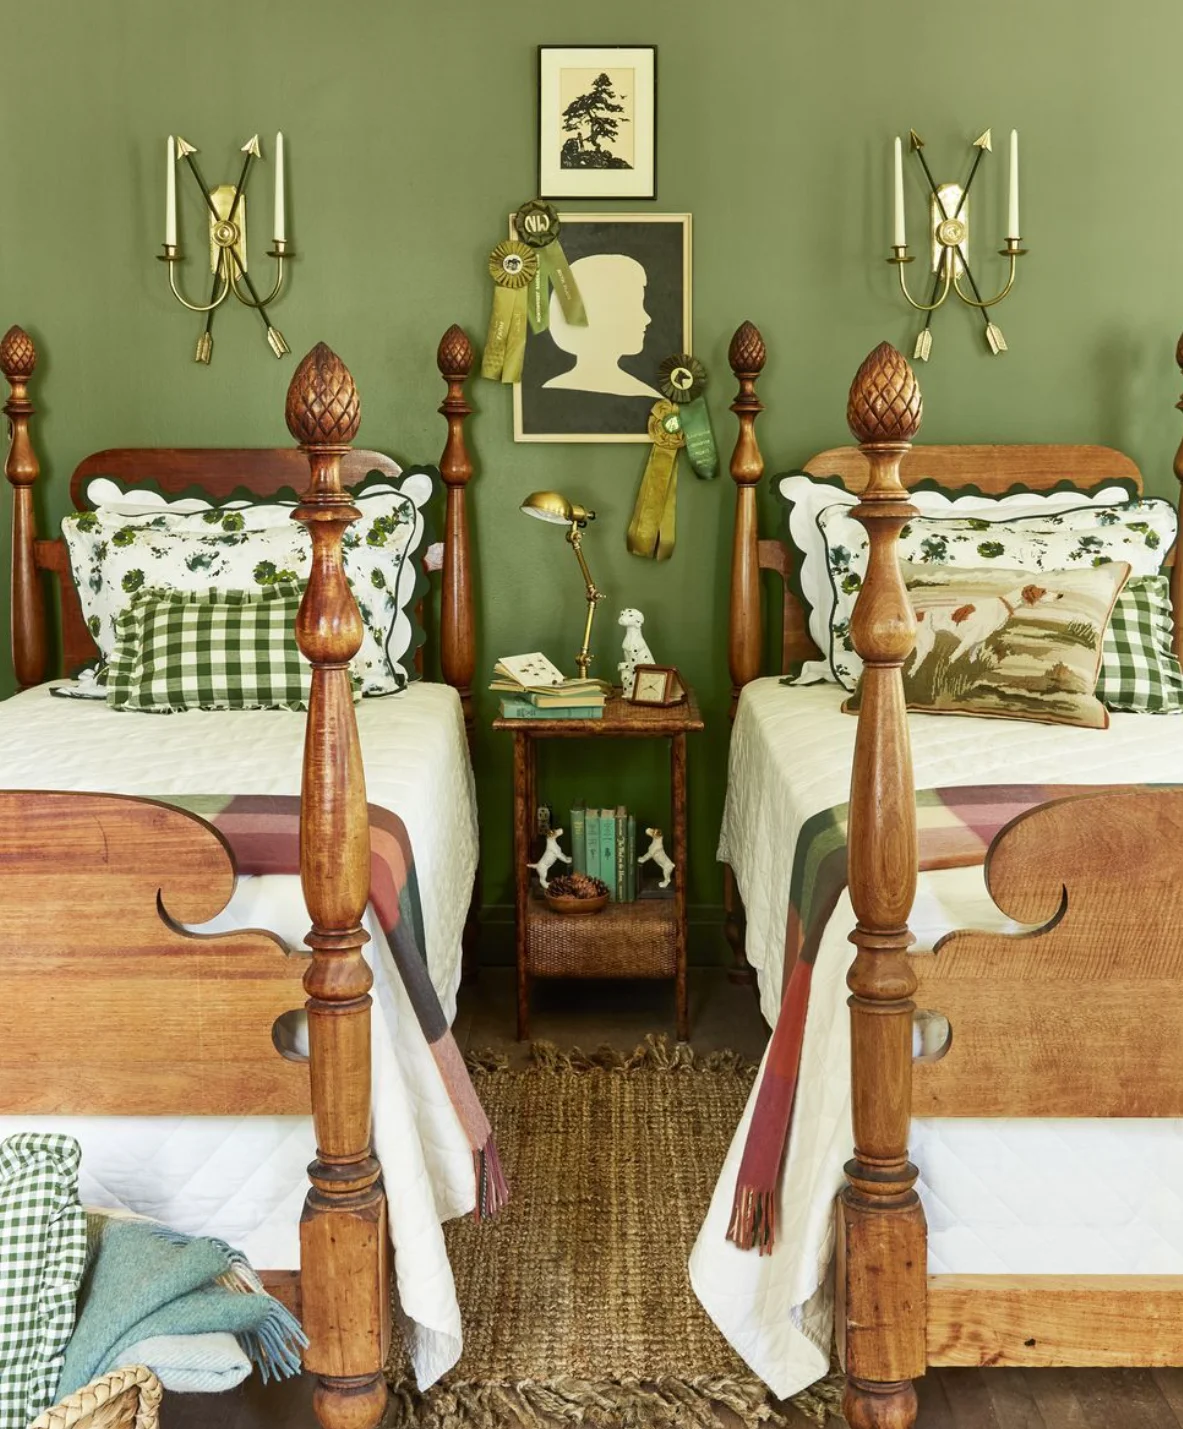 Twin beds with small table in between. Green walls. This is a small guest bedroom idea